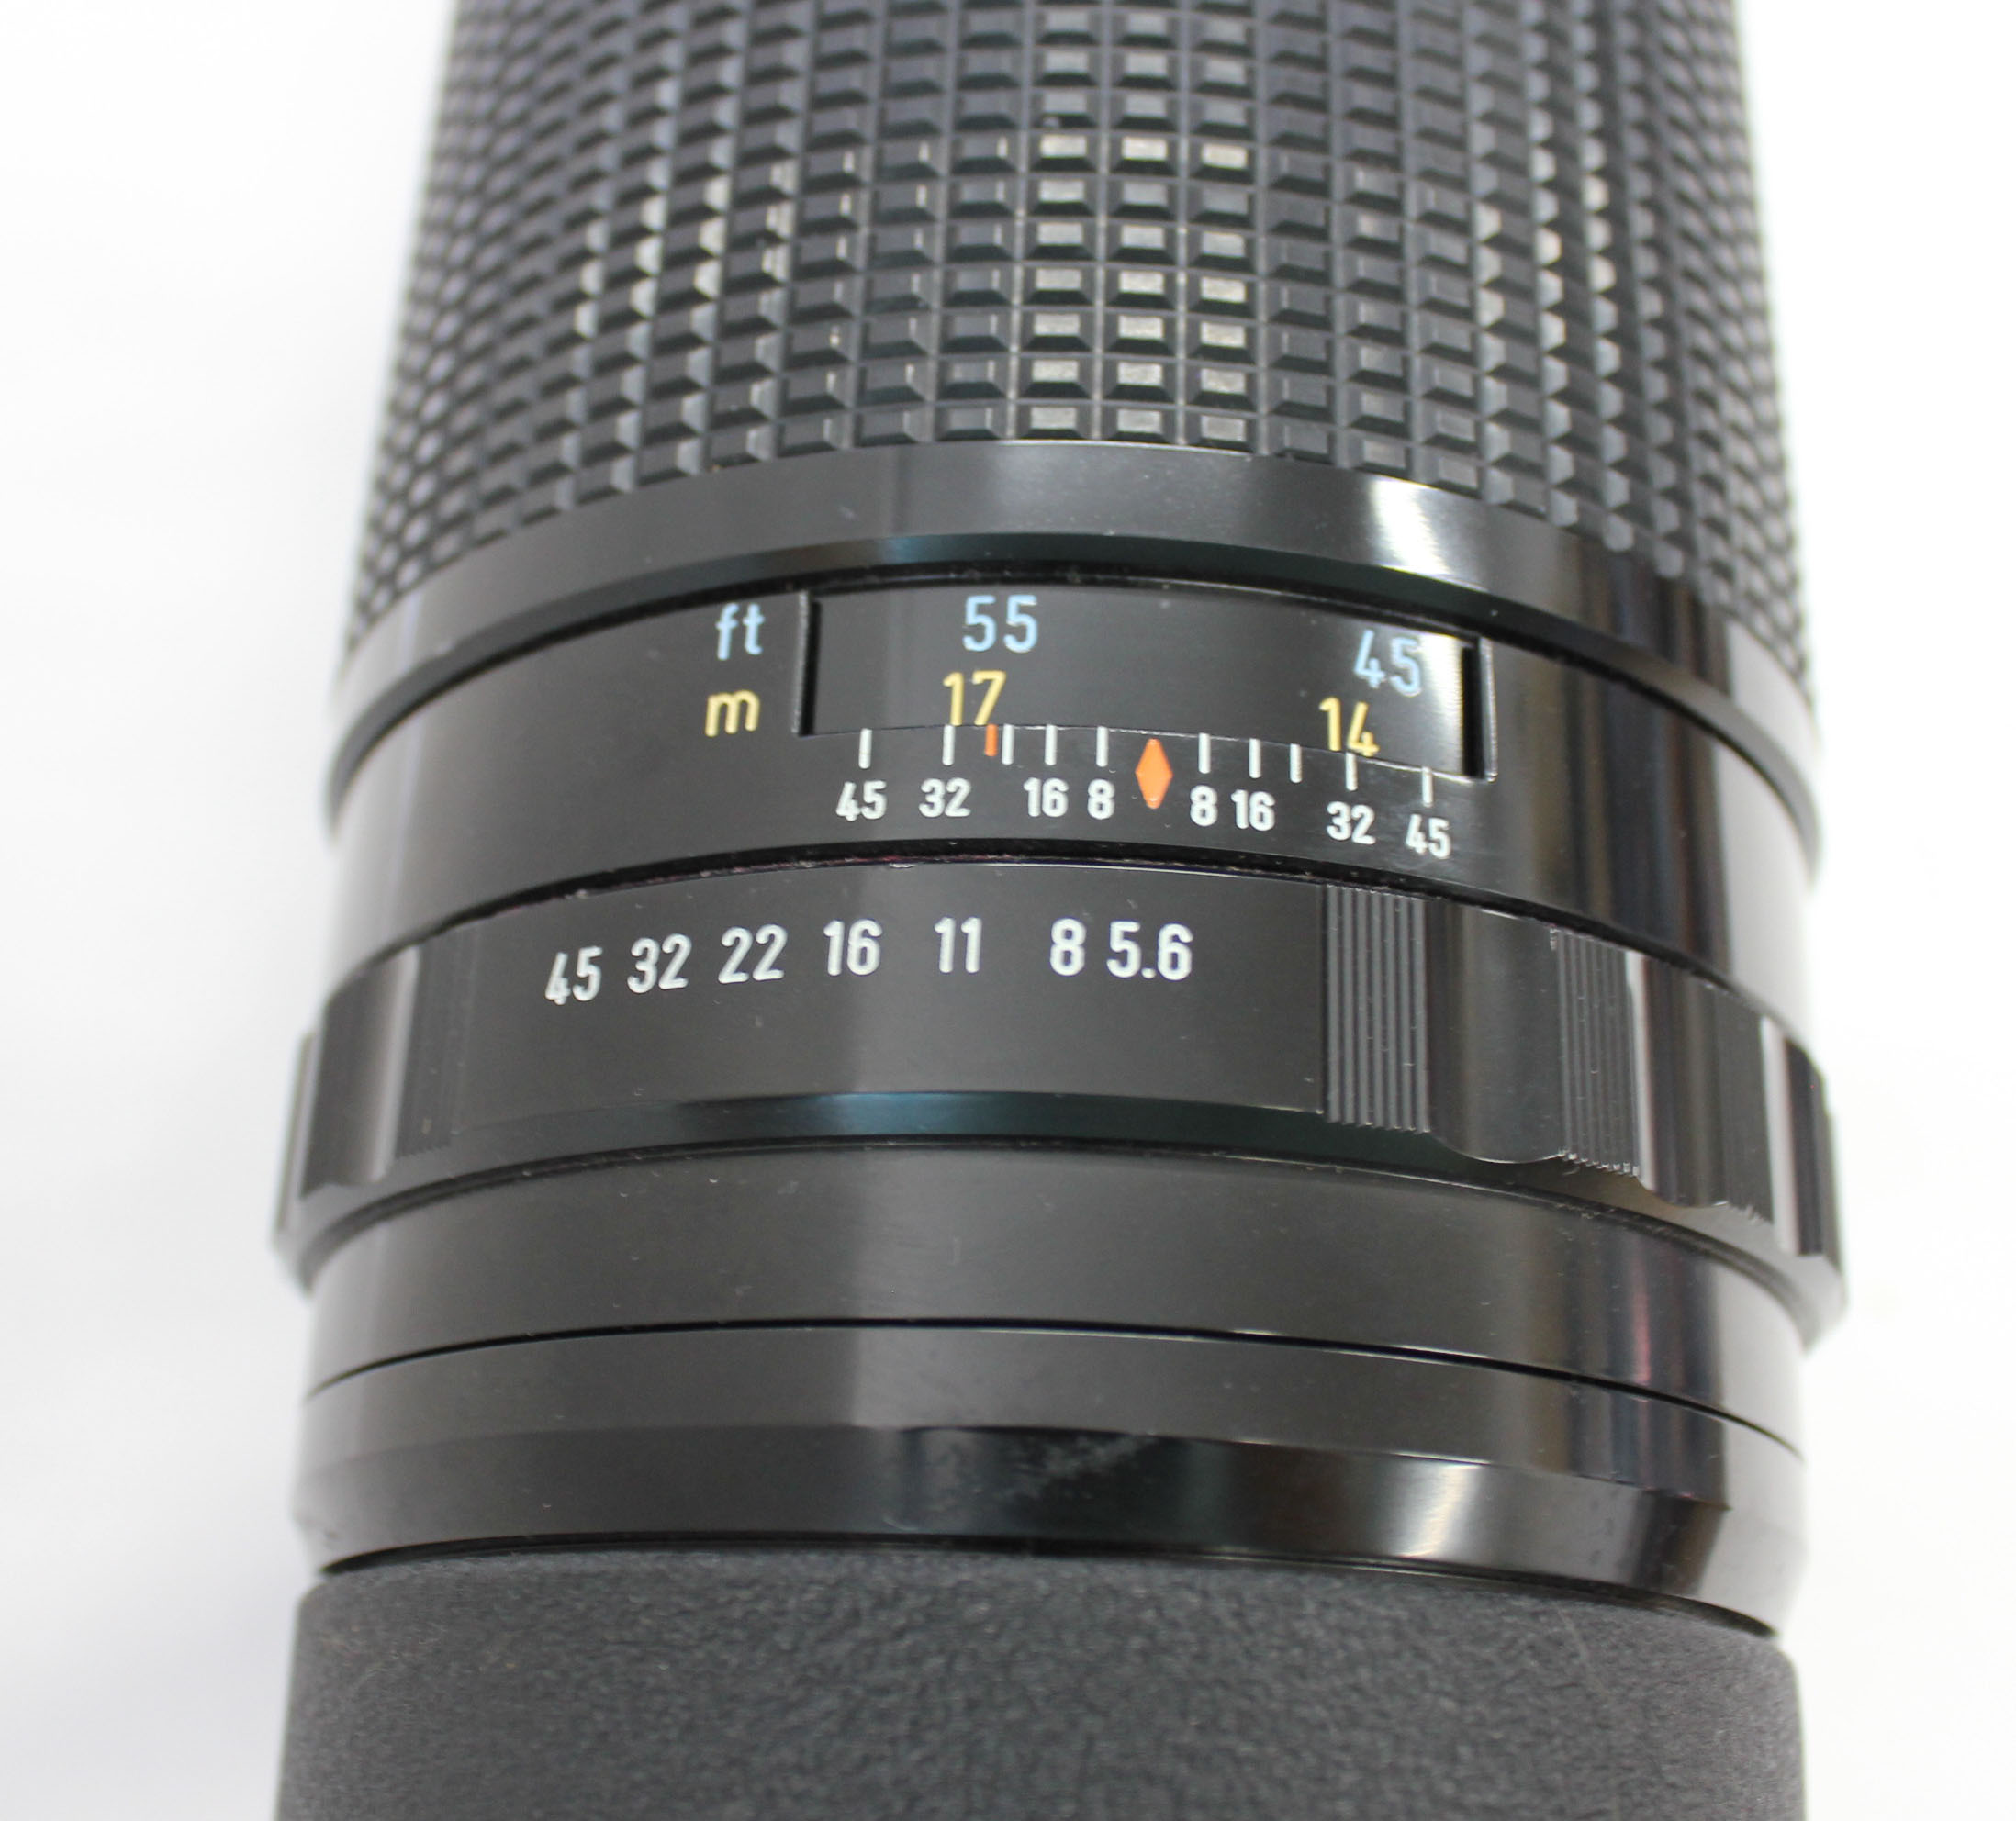  SMC PENTAX 6x7 500mm F/5.6 MF Telephoto Lens for 6x7 67 67II from Japan Photo 11